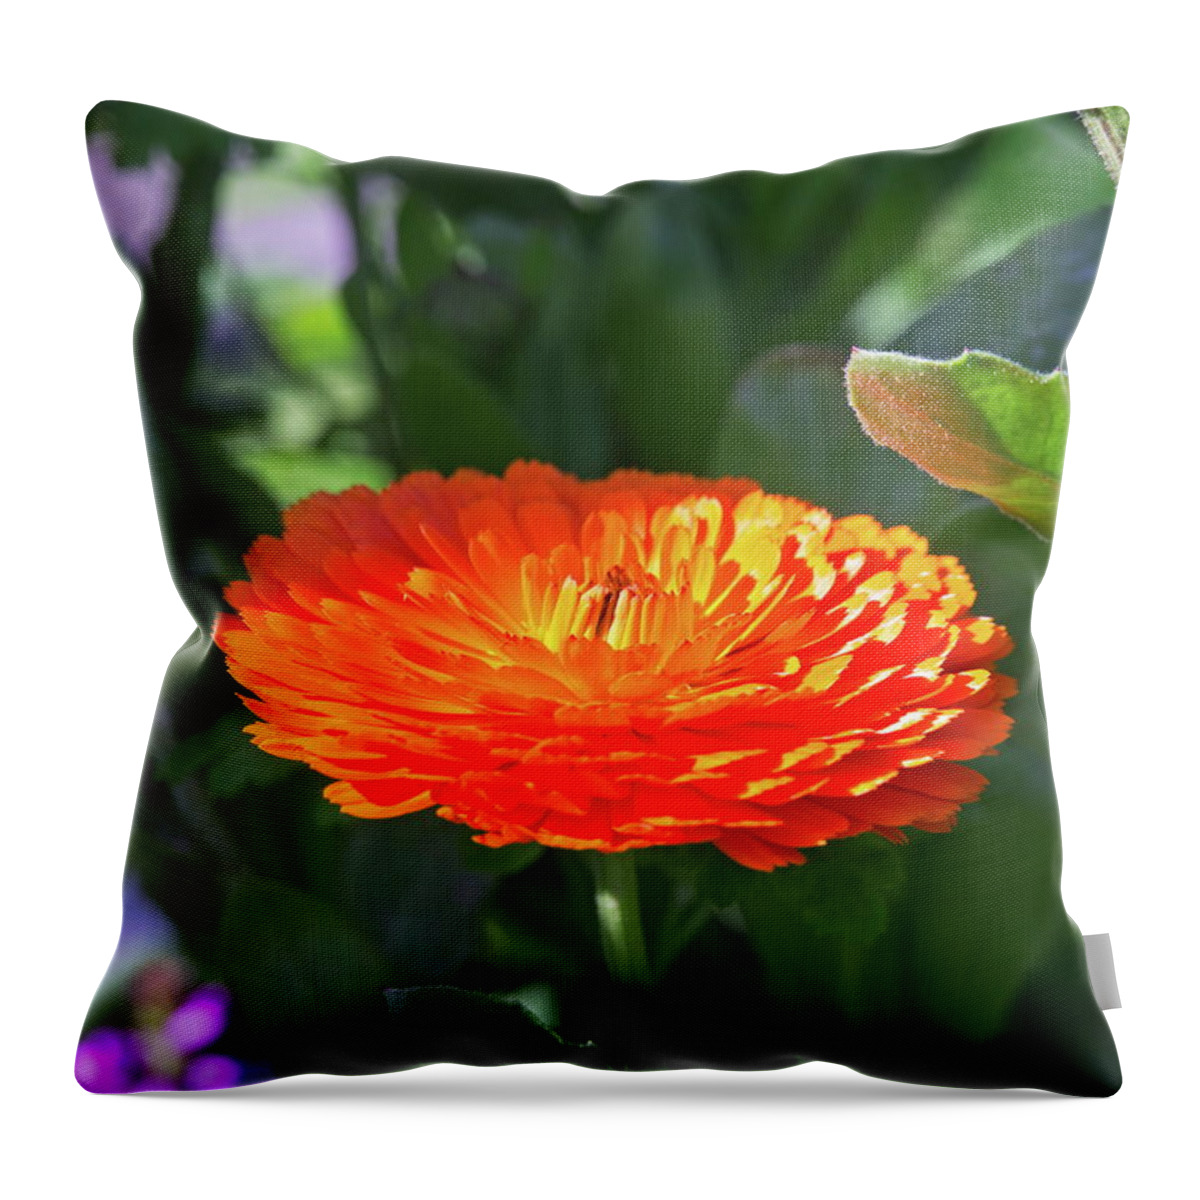 Beautiful Throw Pillow featuring the photograph Orange Blossom by David Desautel